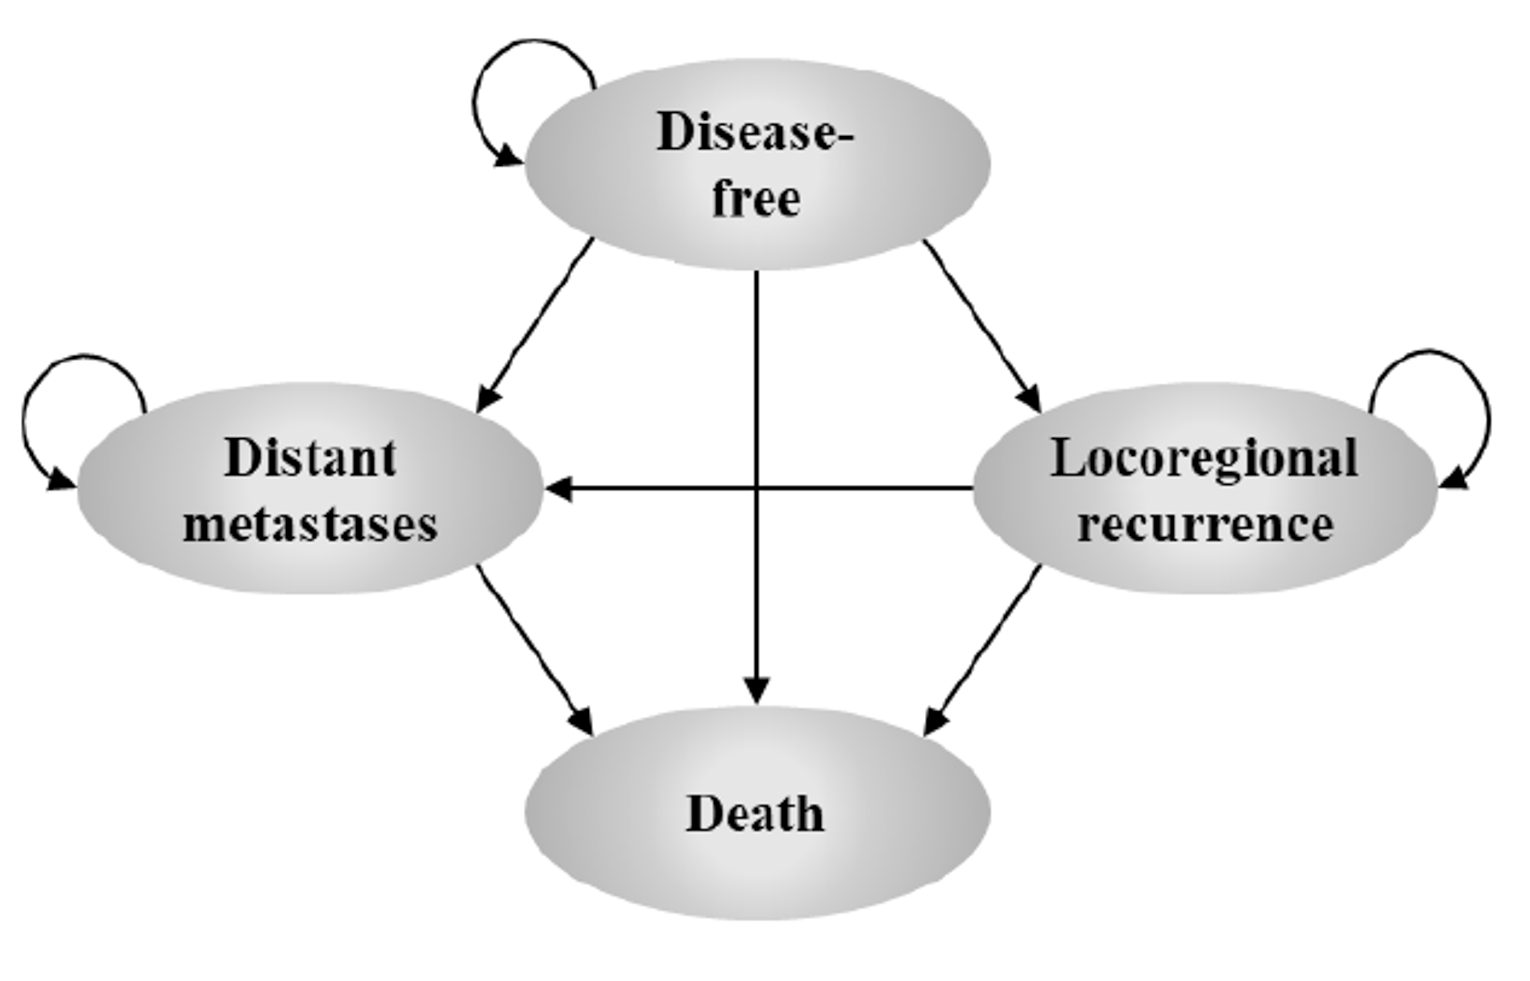 Diagram of a Markov model with 4 states: “disease-free,” “distant metastases,” “locoregional recurrence,” and “death.” Arrows are used to describe movement between each state.